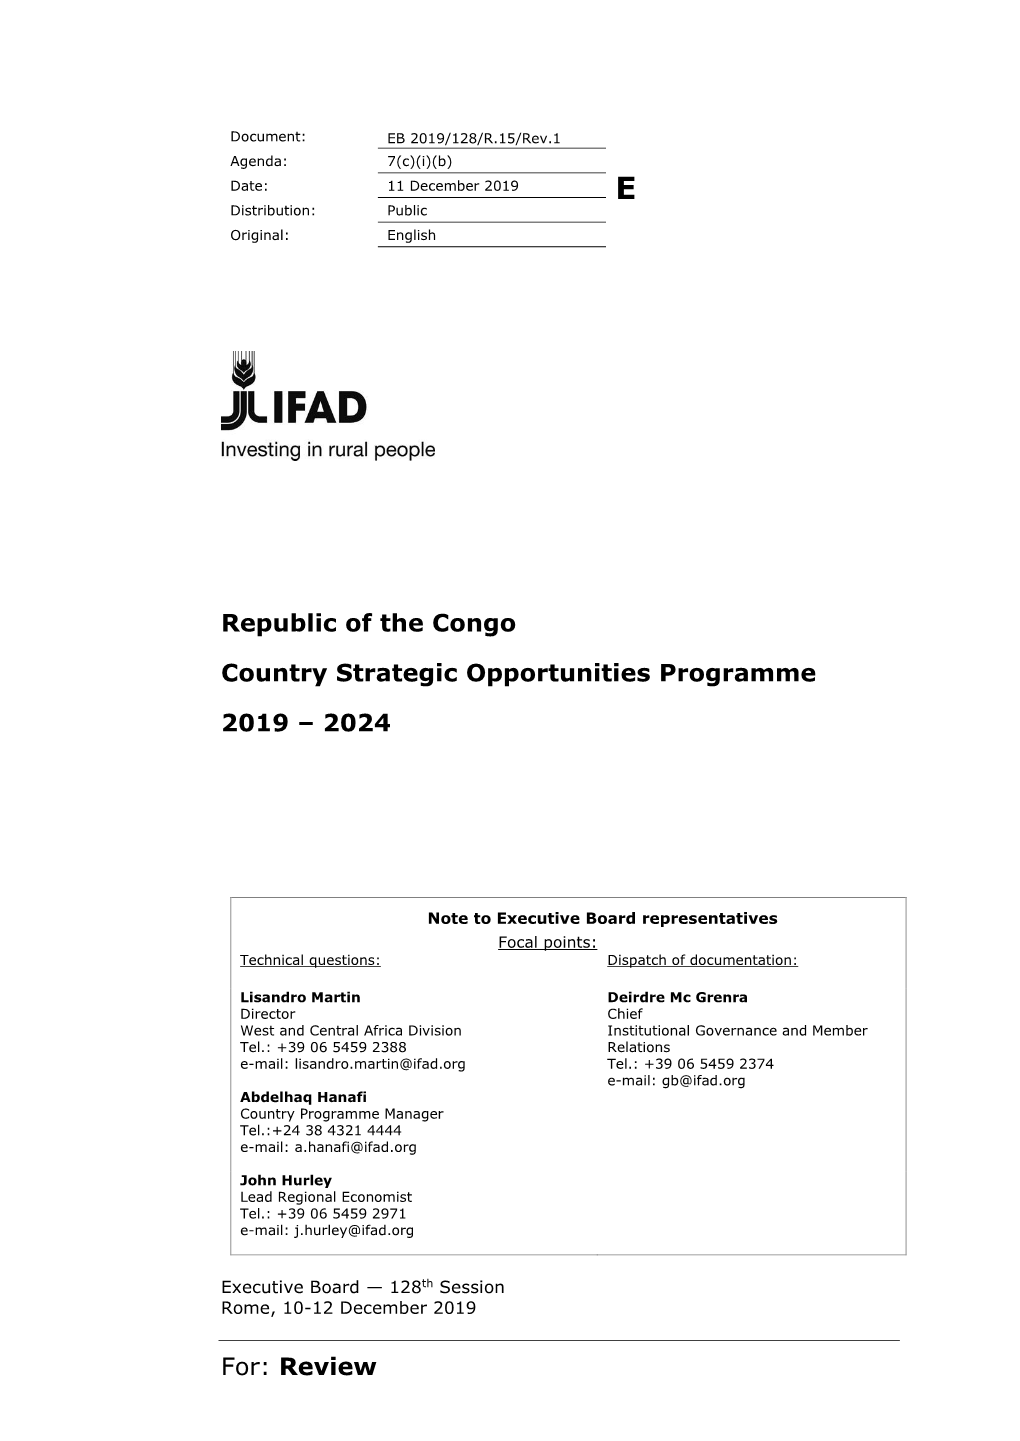 For: Review Republic of the Congo Country Strategic Opportunities